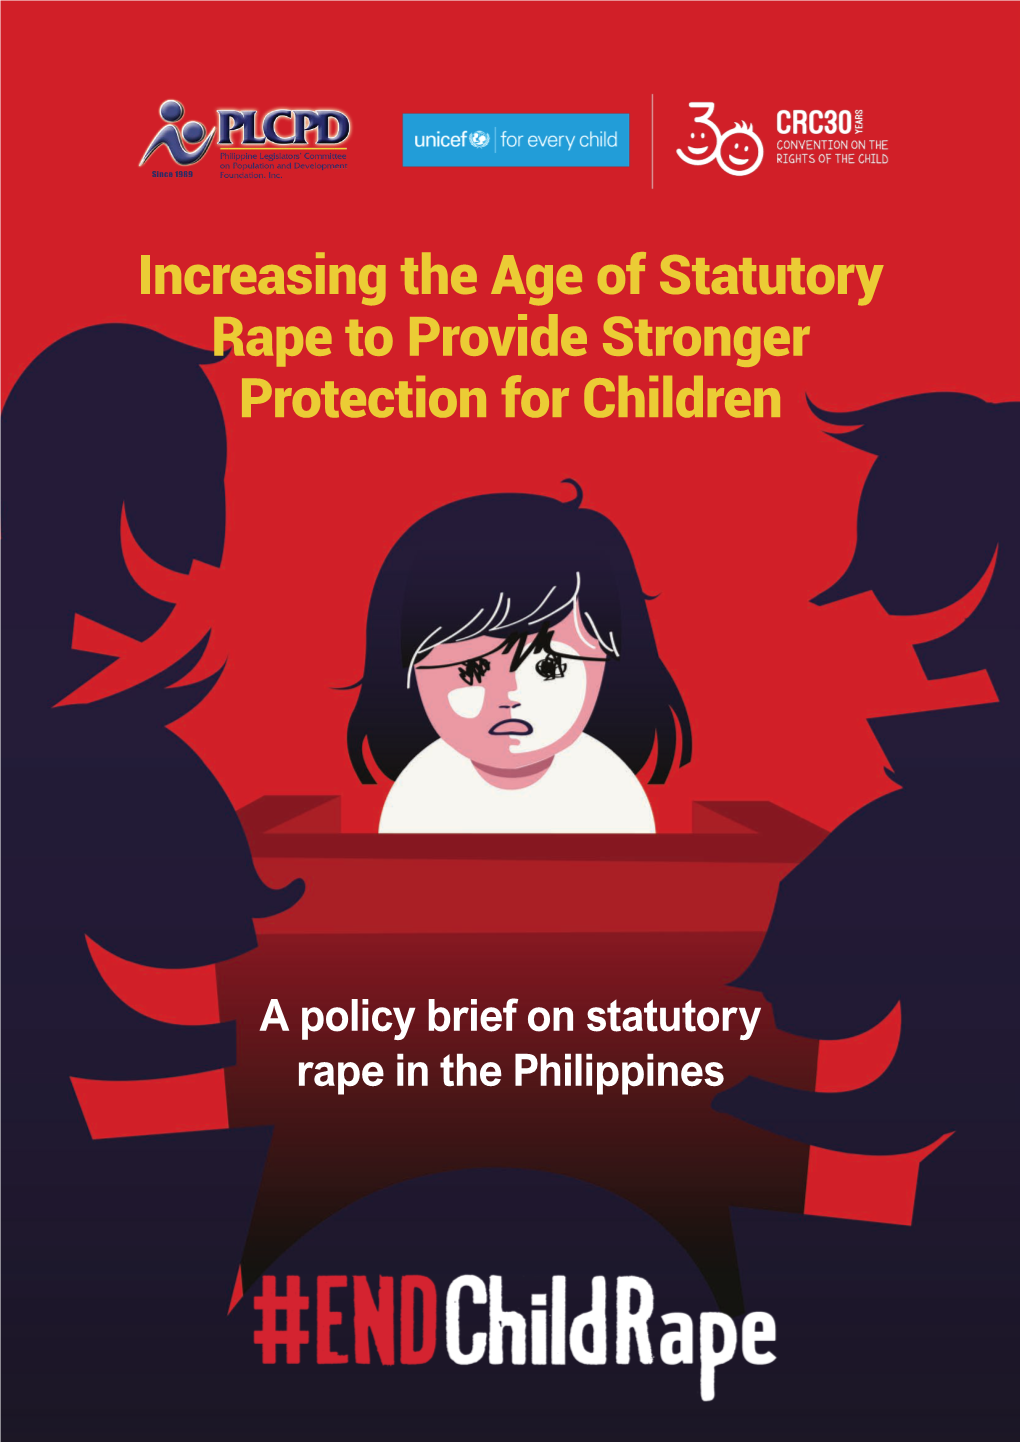 Increasing the Age of Statutory Rape to Provide Stronger Protection for Children